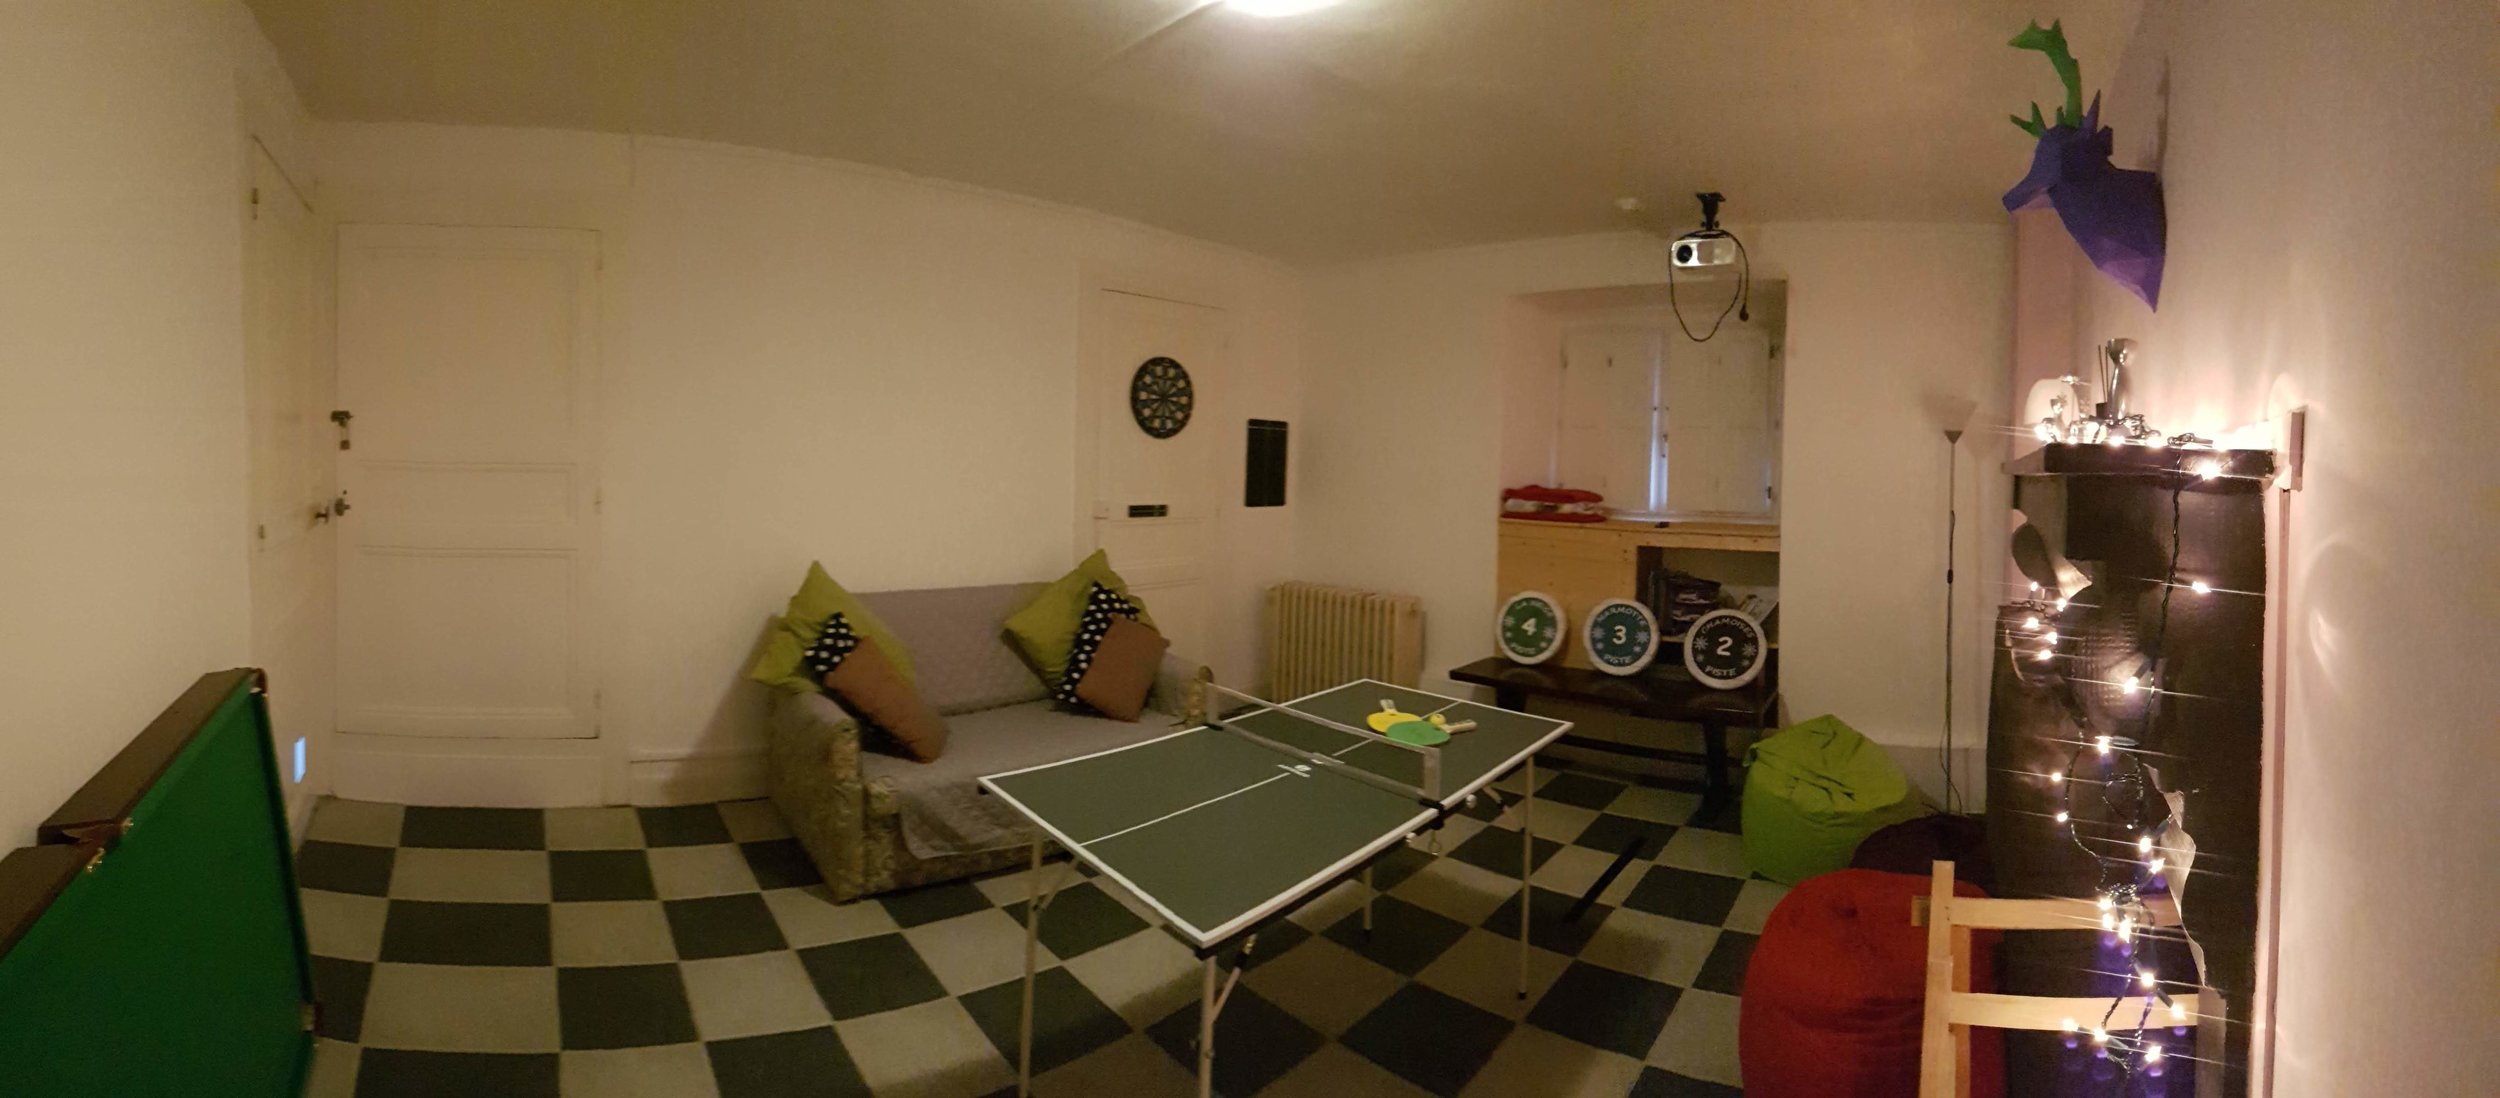 Games and Cinema Room